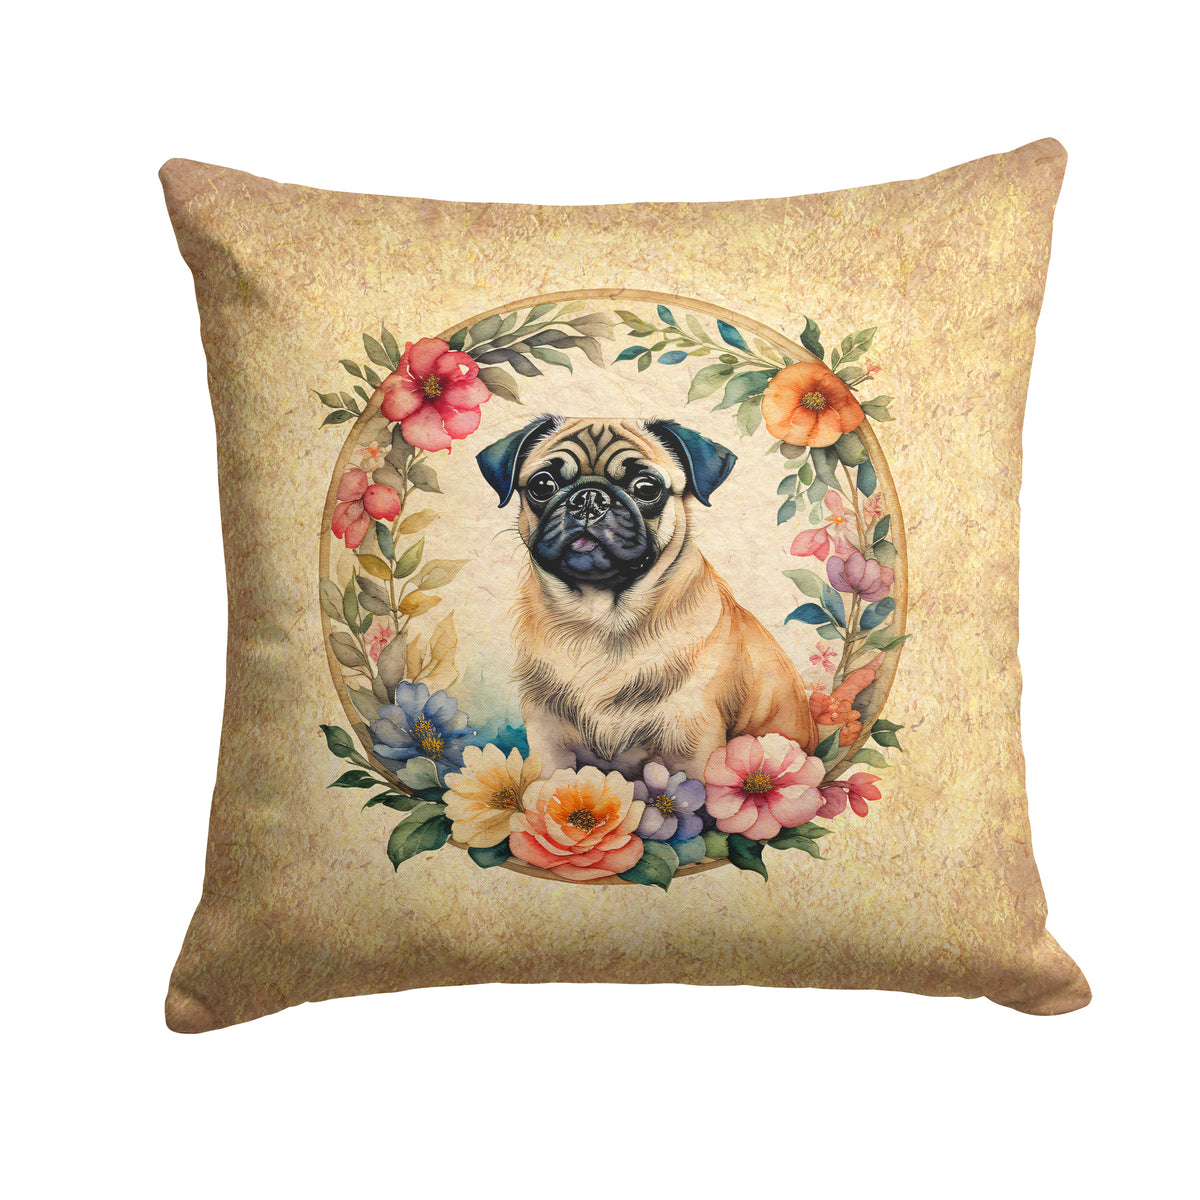 Buy this Fawn Pug and Flowers Fabric Decorative Pillow